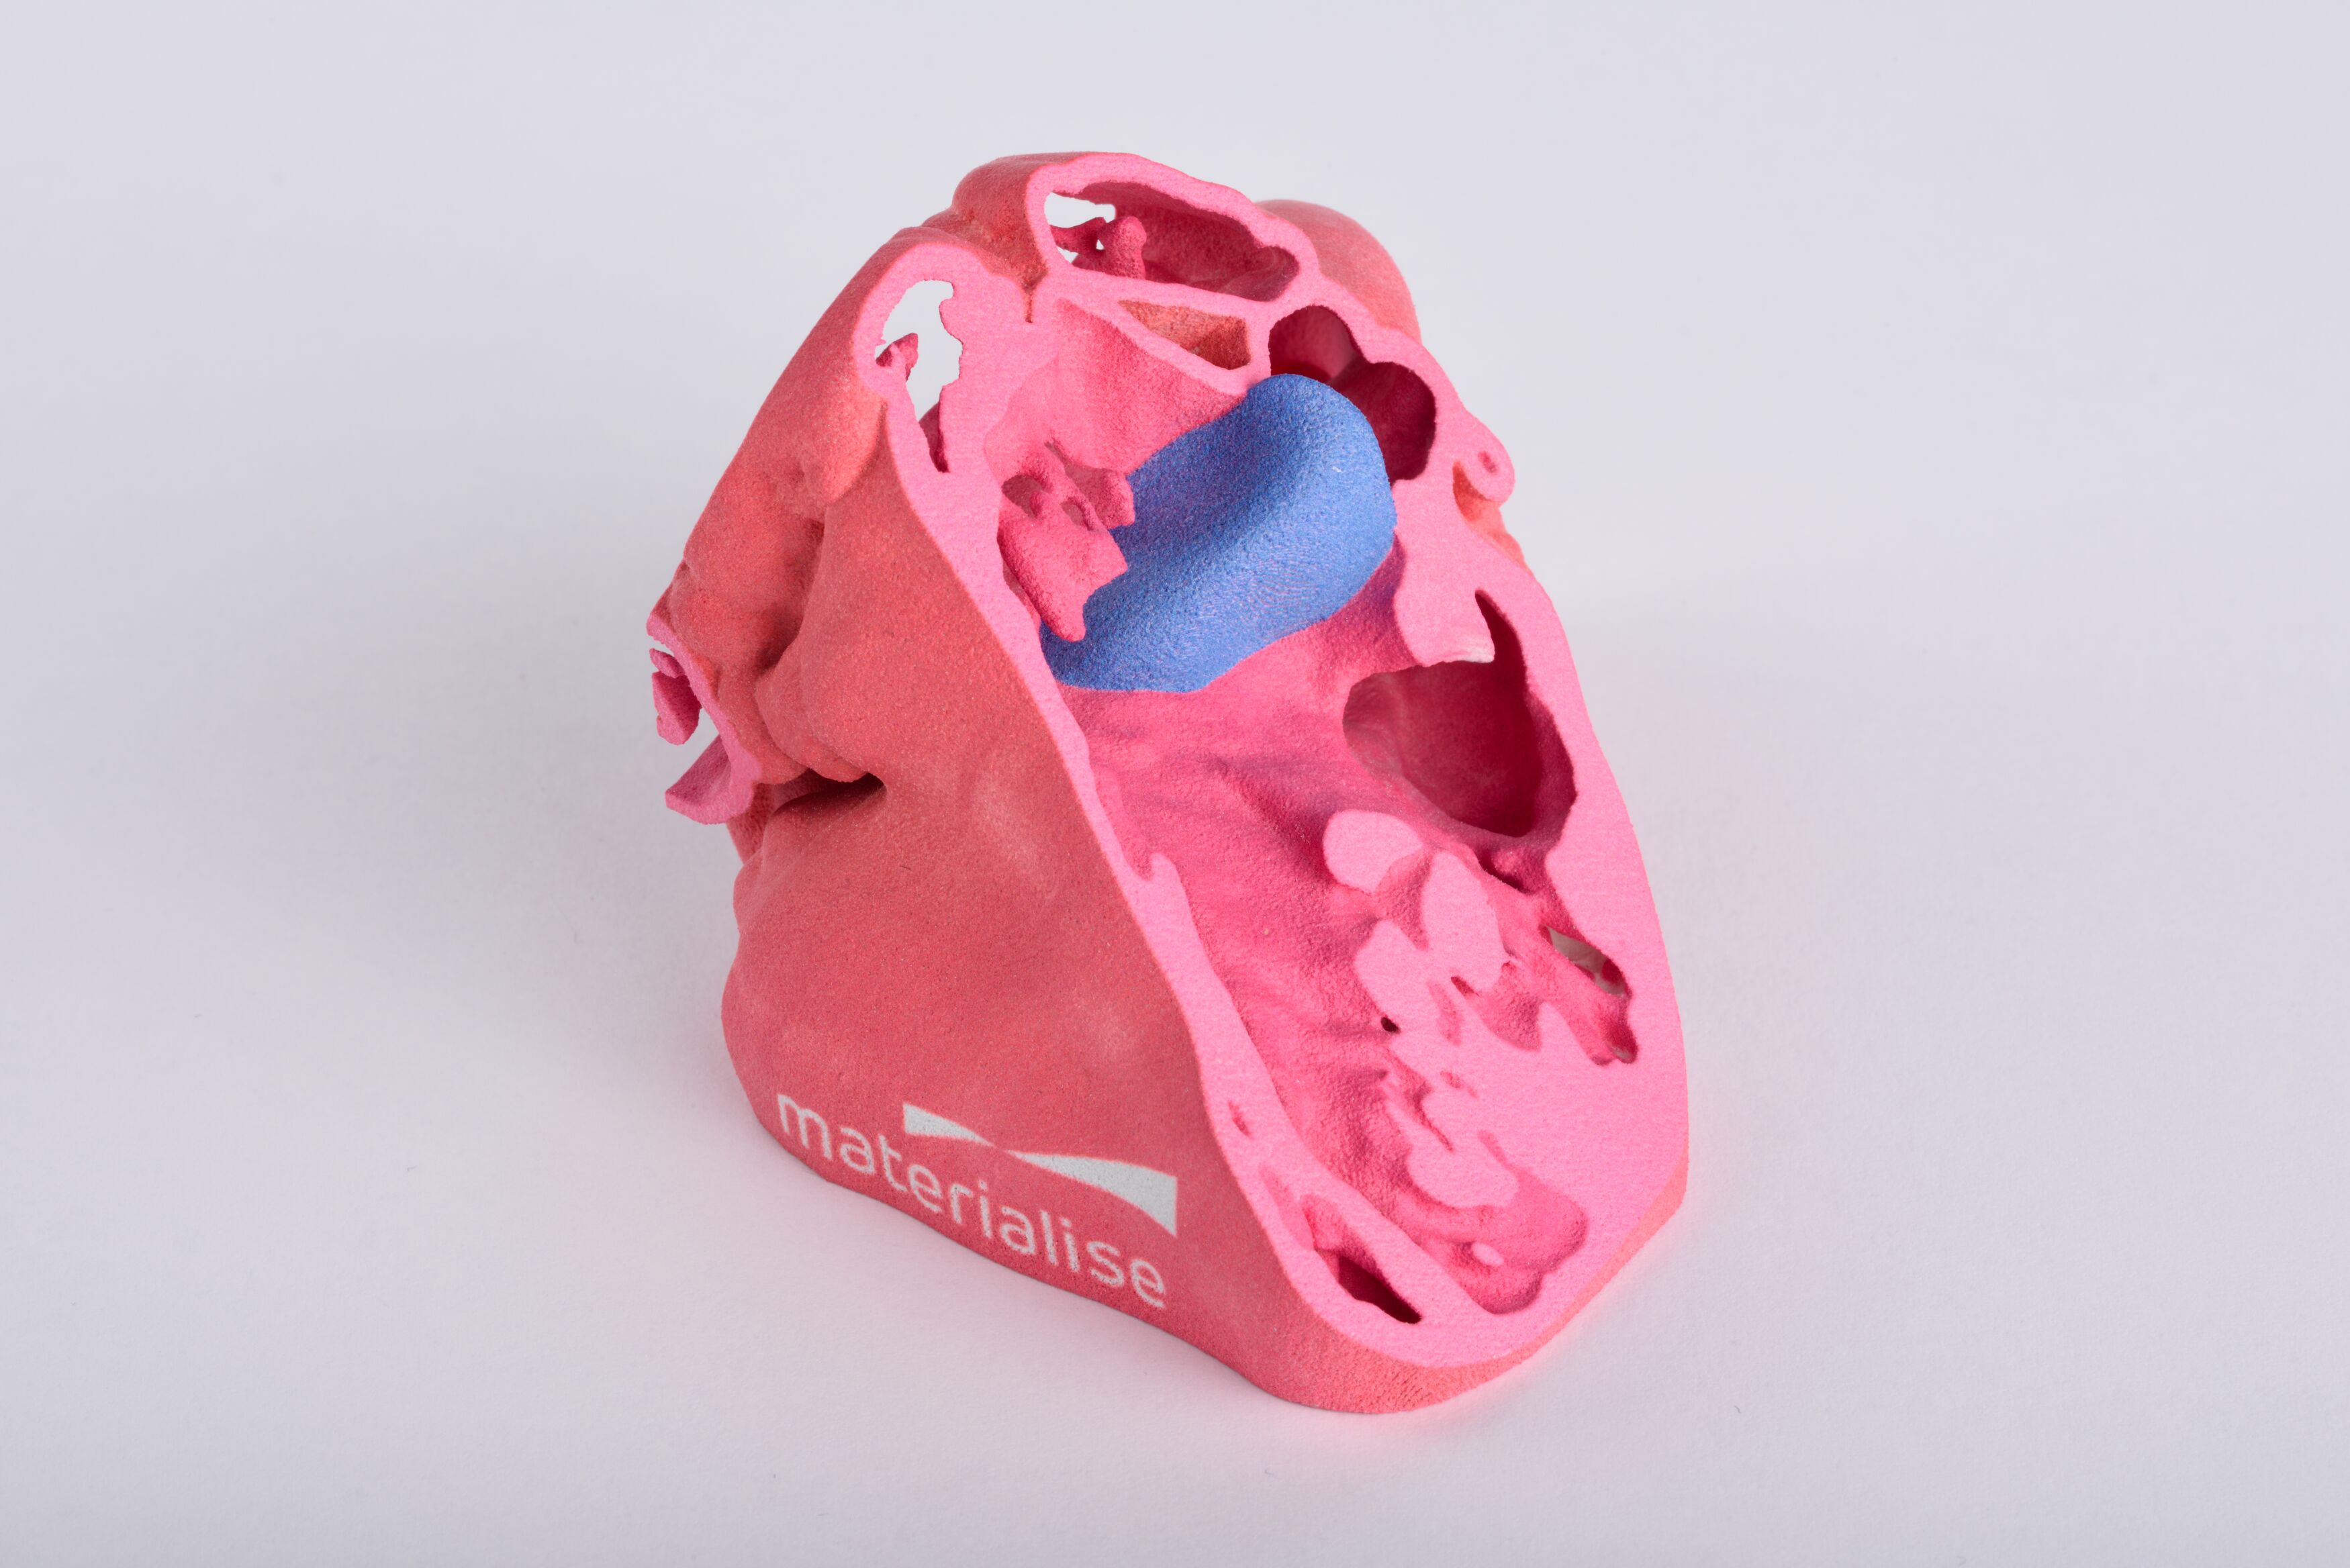 RSNA and ACR to Build 3D Printing Clinical Data Registry